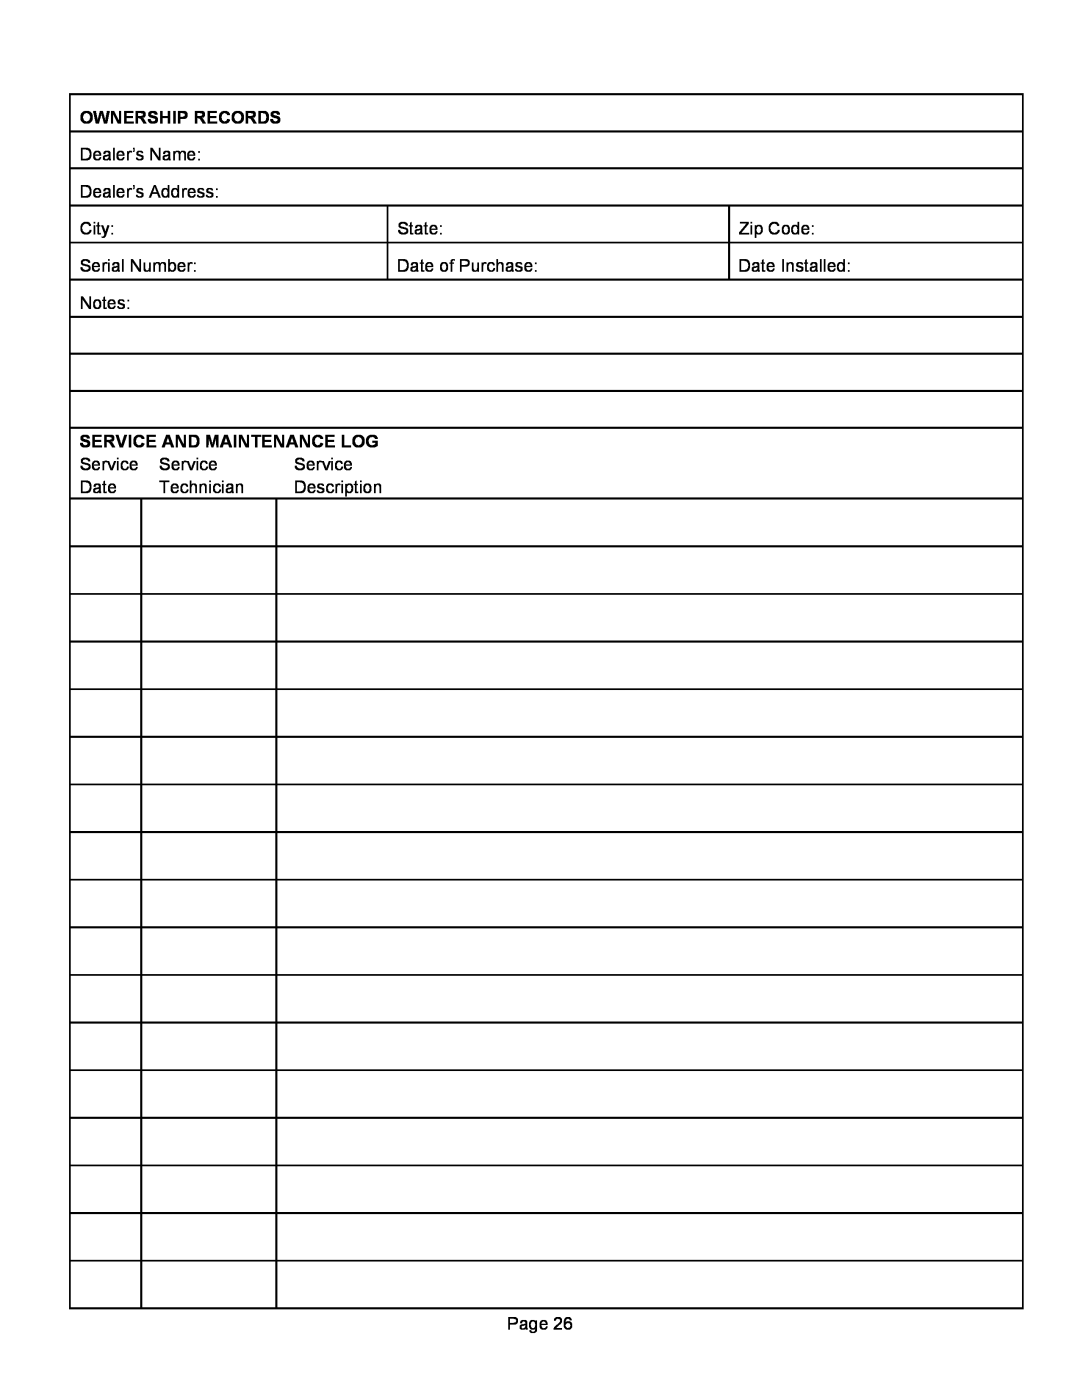 Milwaukee 1500HT operation manual Ownership Records, Service And Maintenance Log 